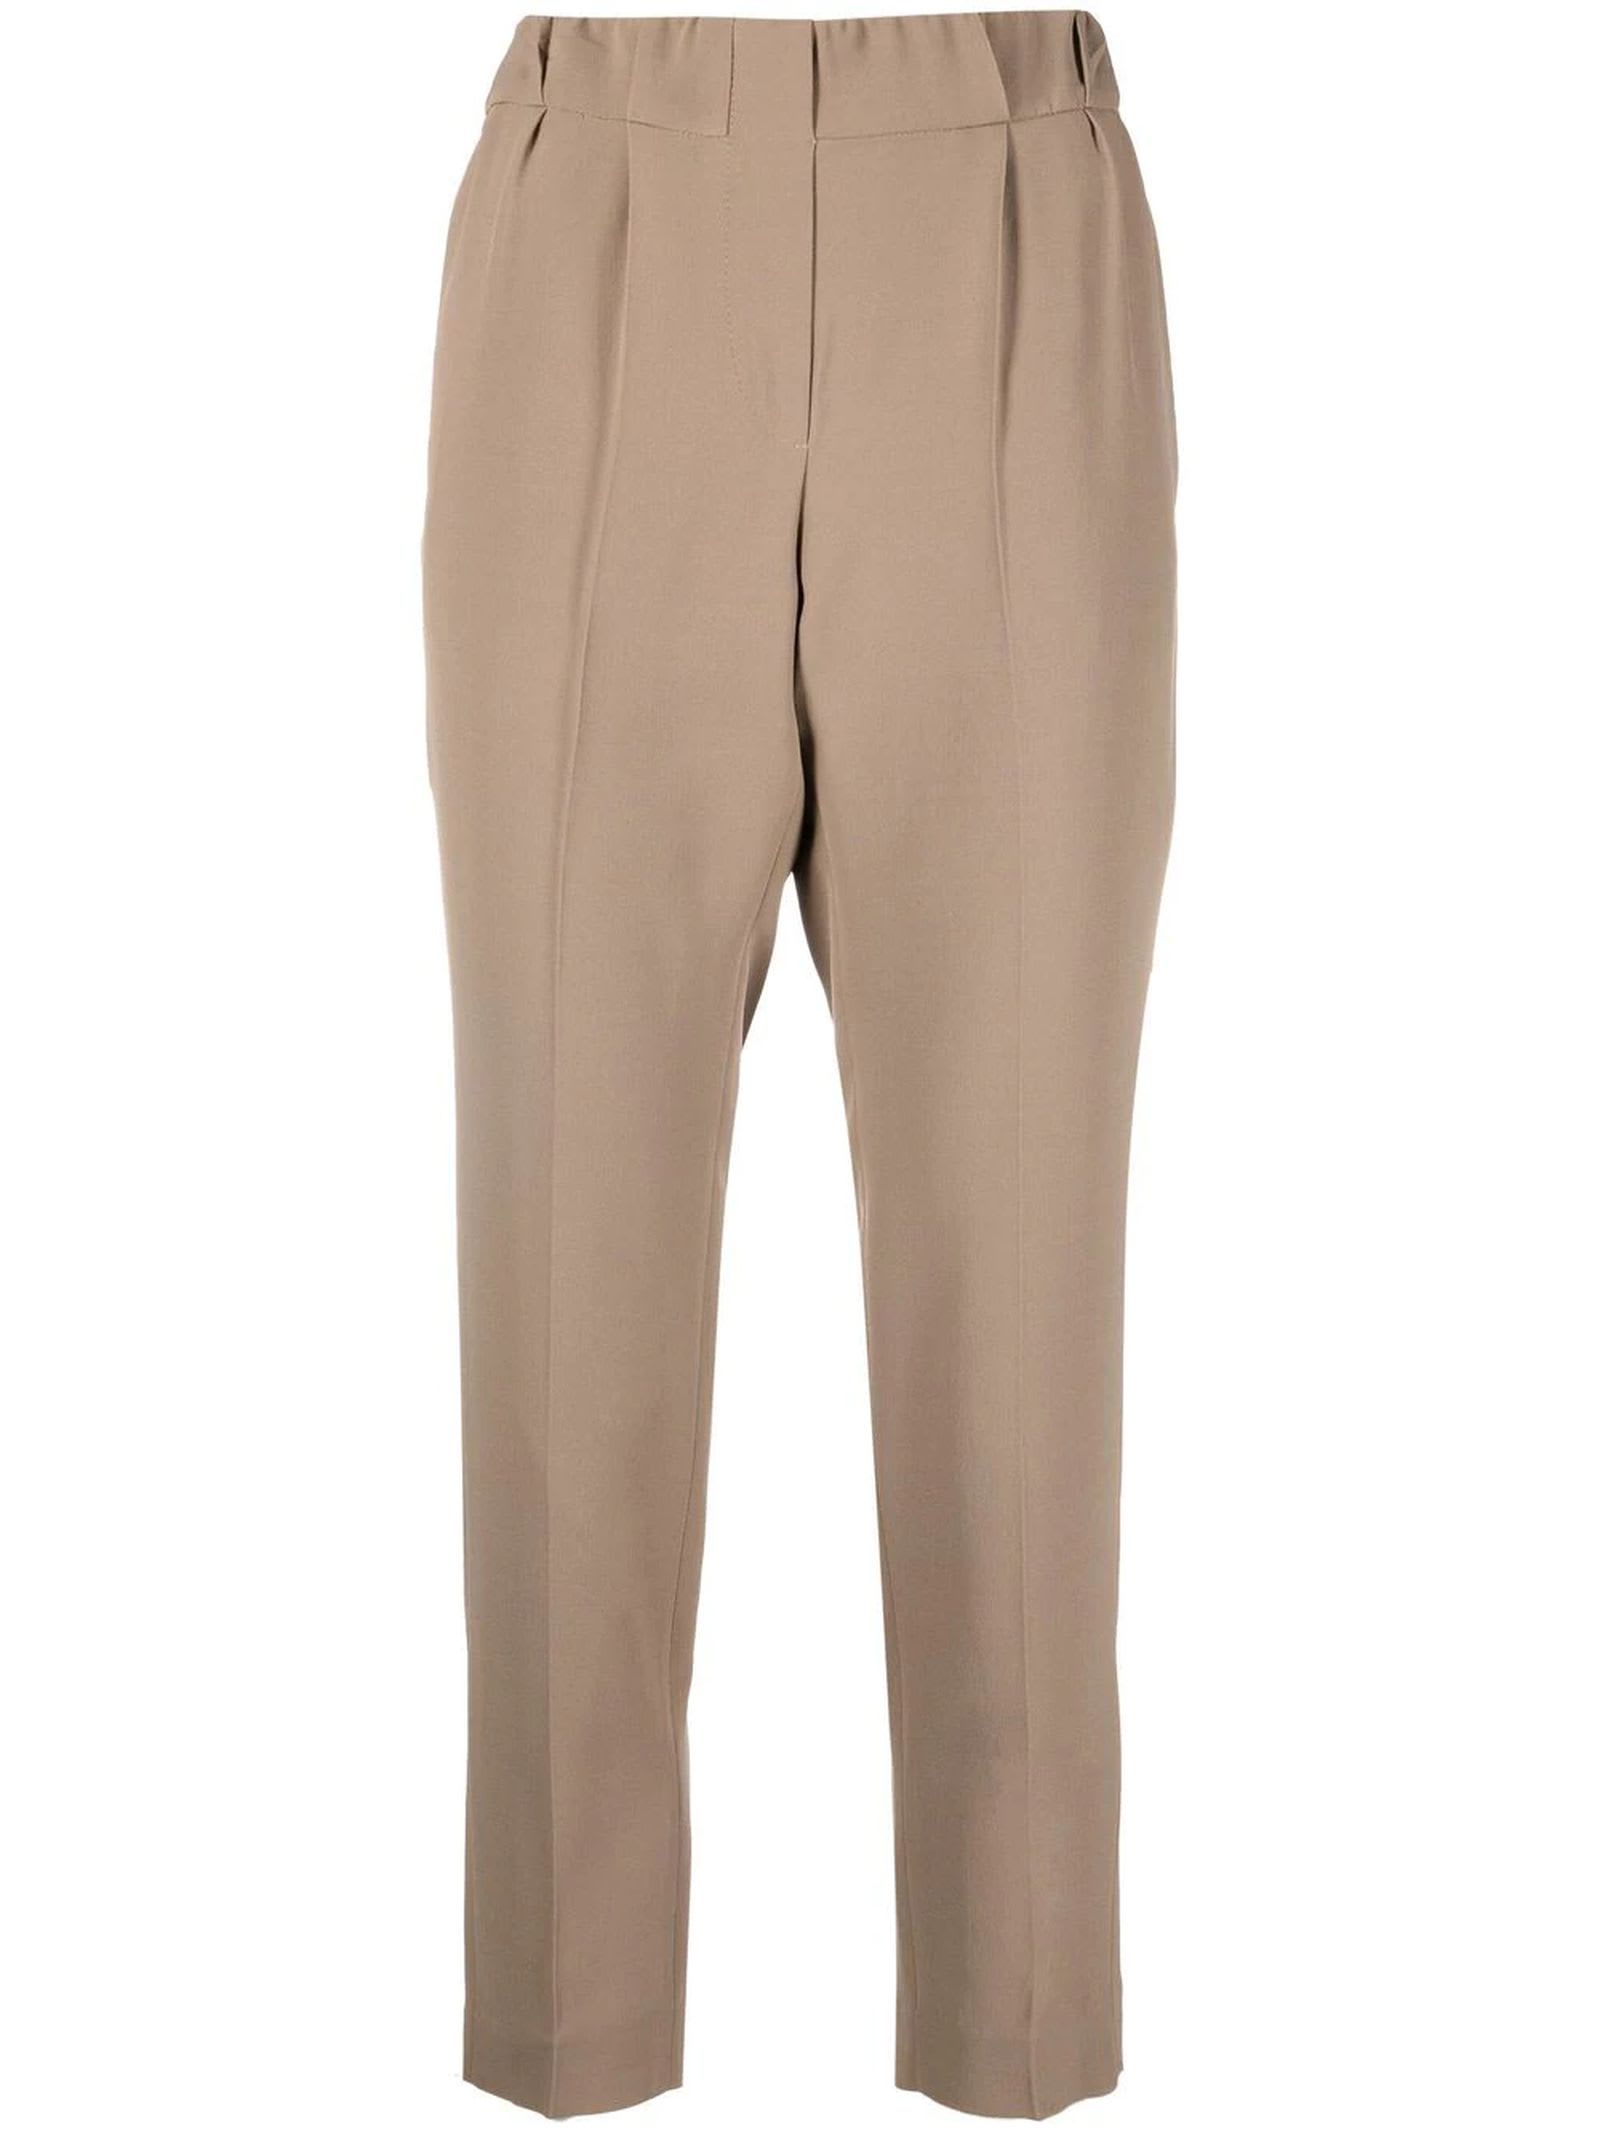 Brunello Cucinelli Camel Brown Cropped Tailored Trousers